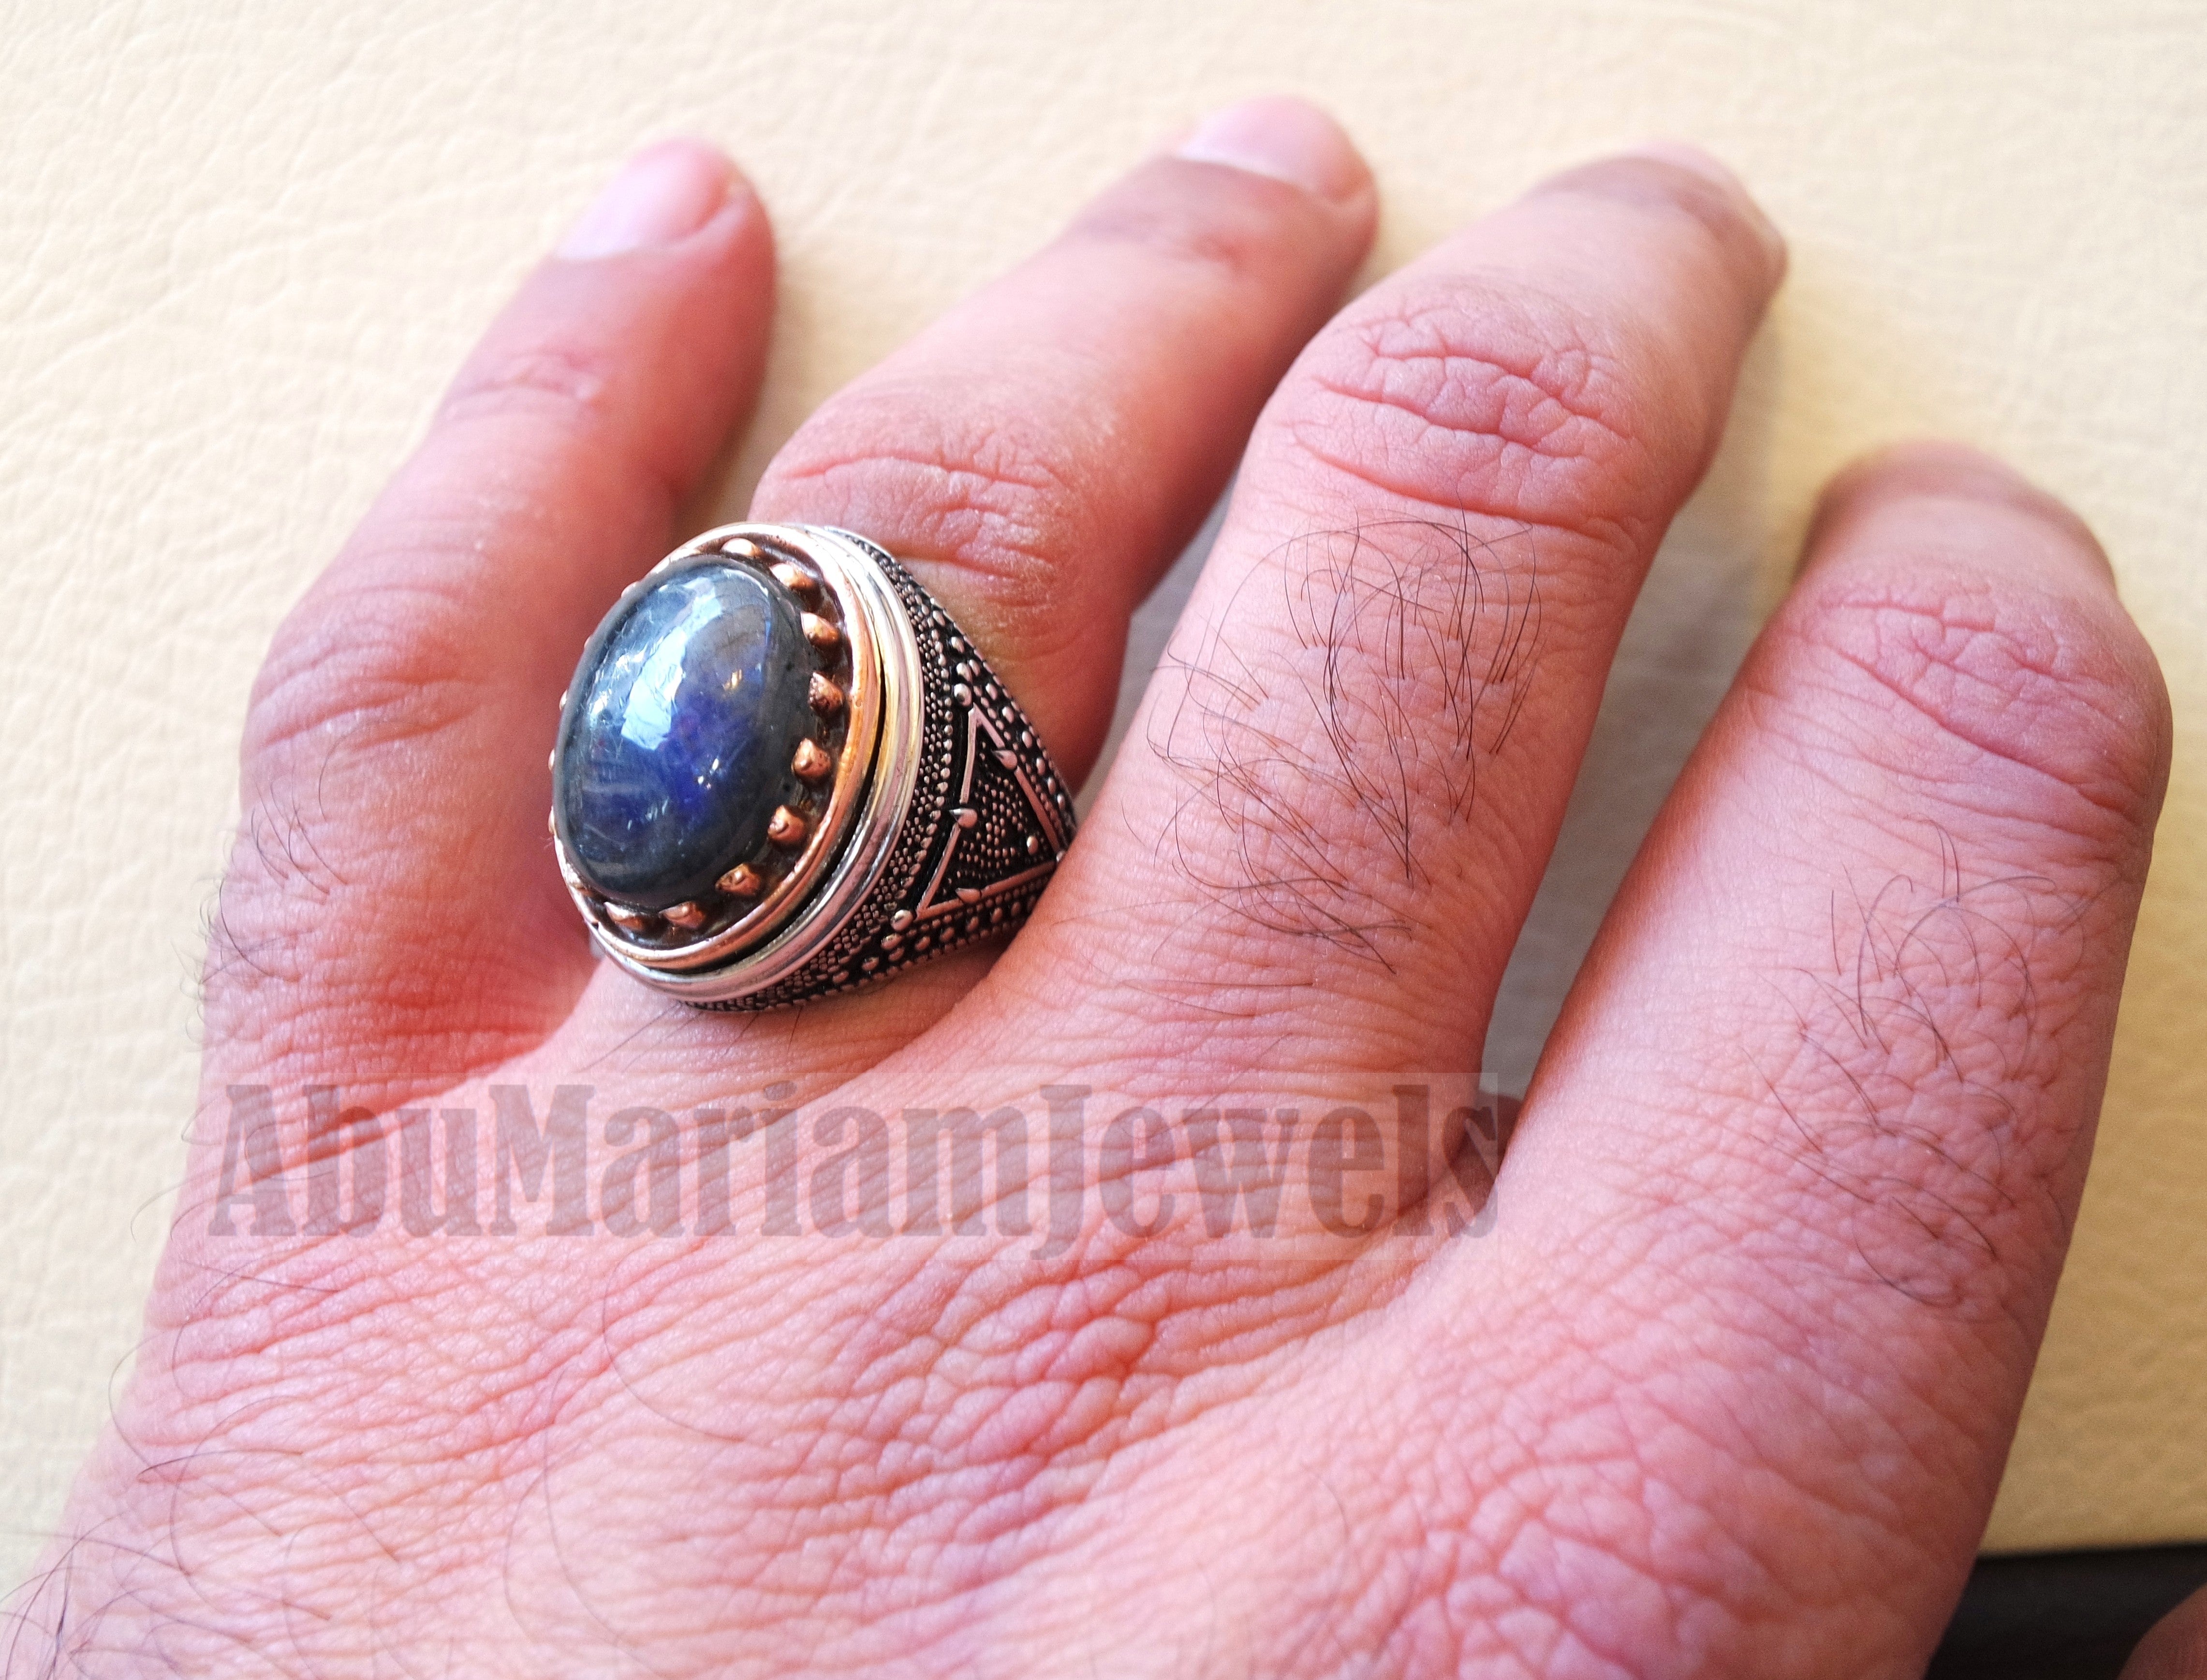 Labradorite ring natural stone multi color semi precious stone heavy sterling silver 925 bronze frame any sizes jewelry express shipping